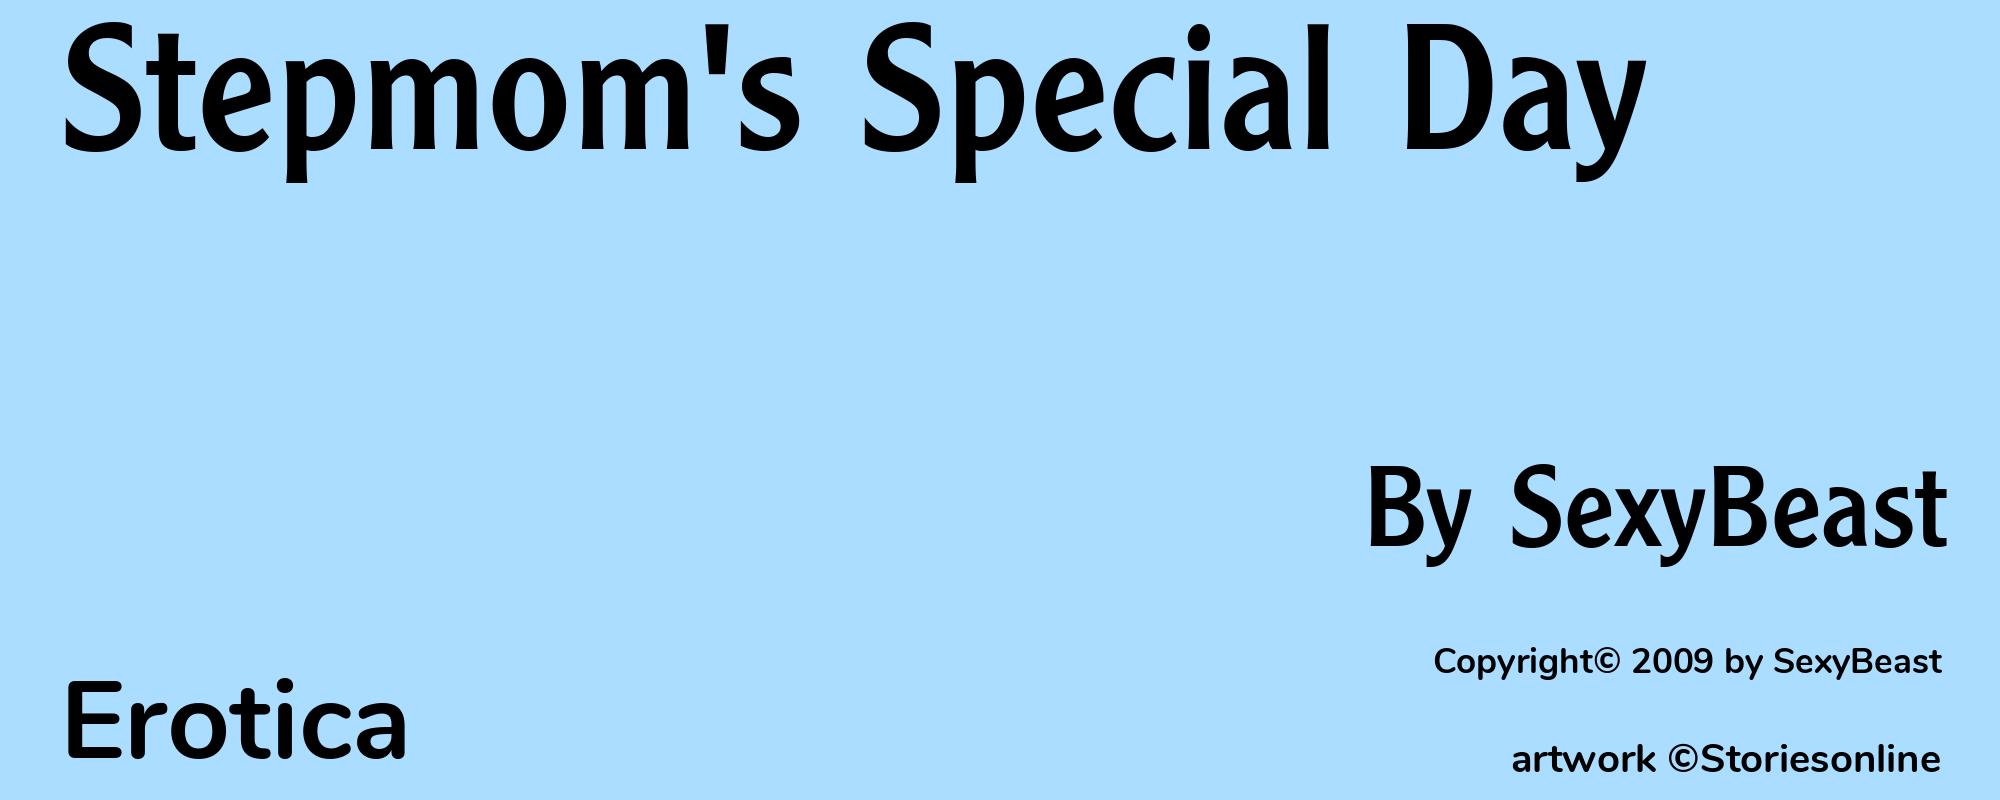 Stepmom's Special Day - Cover